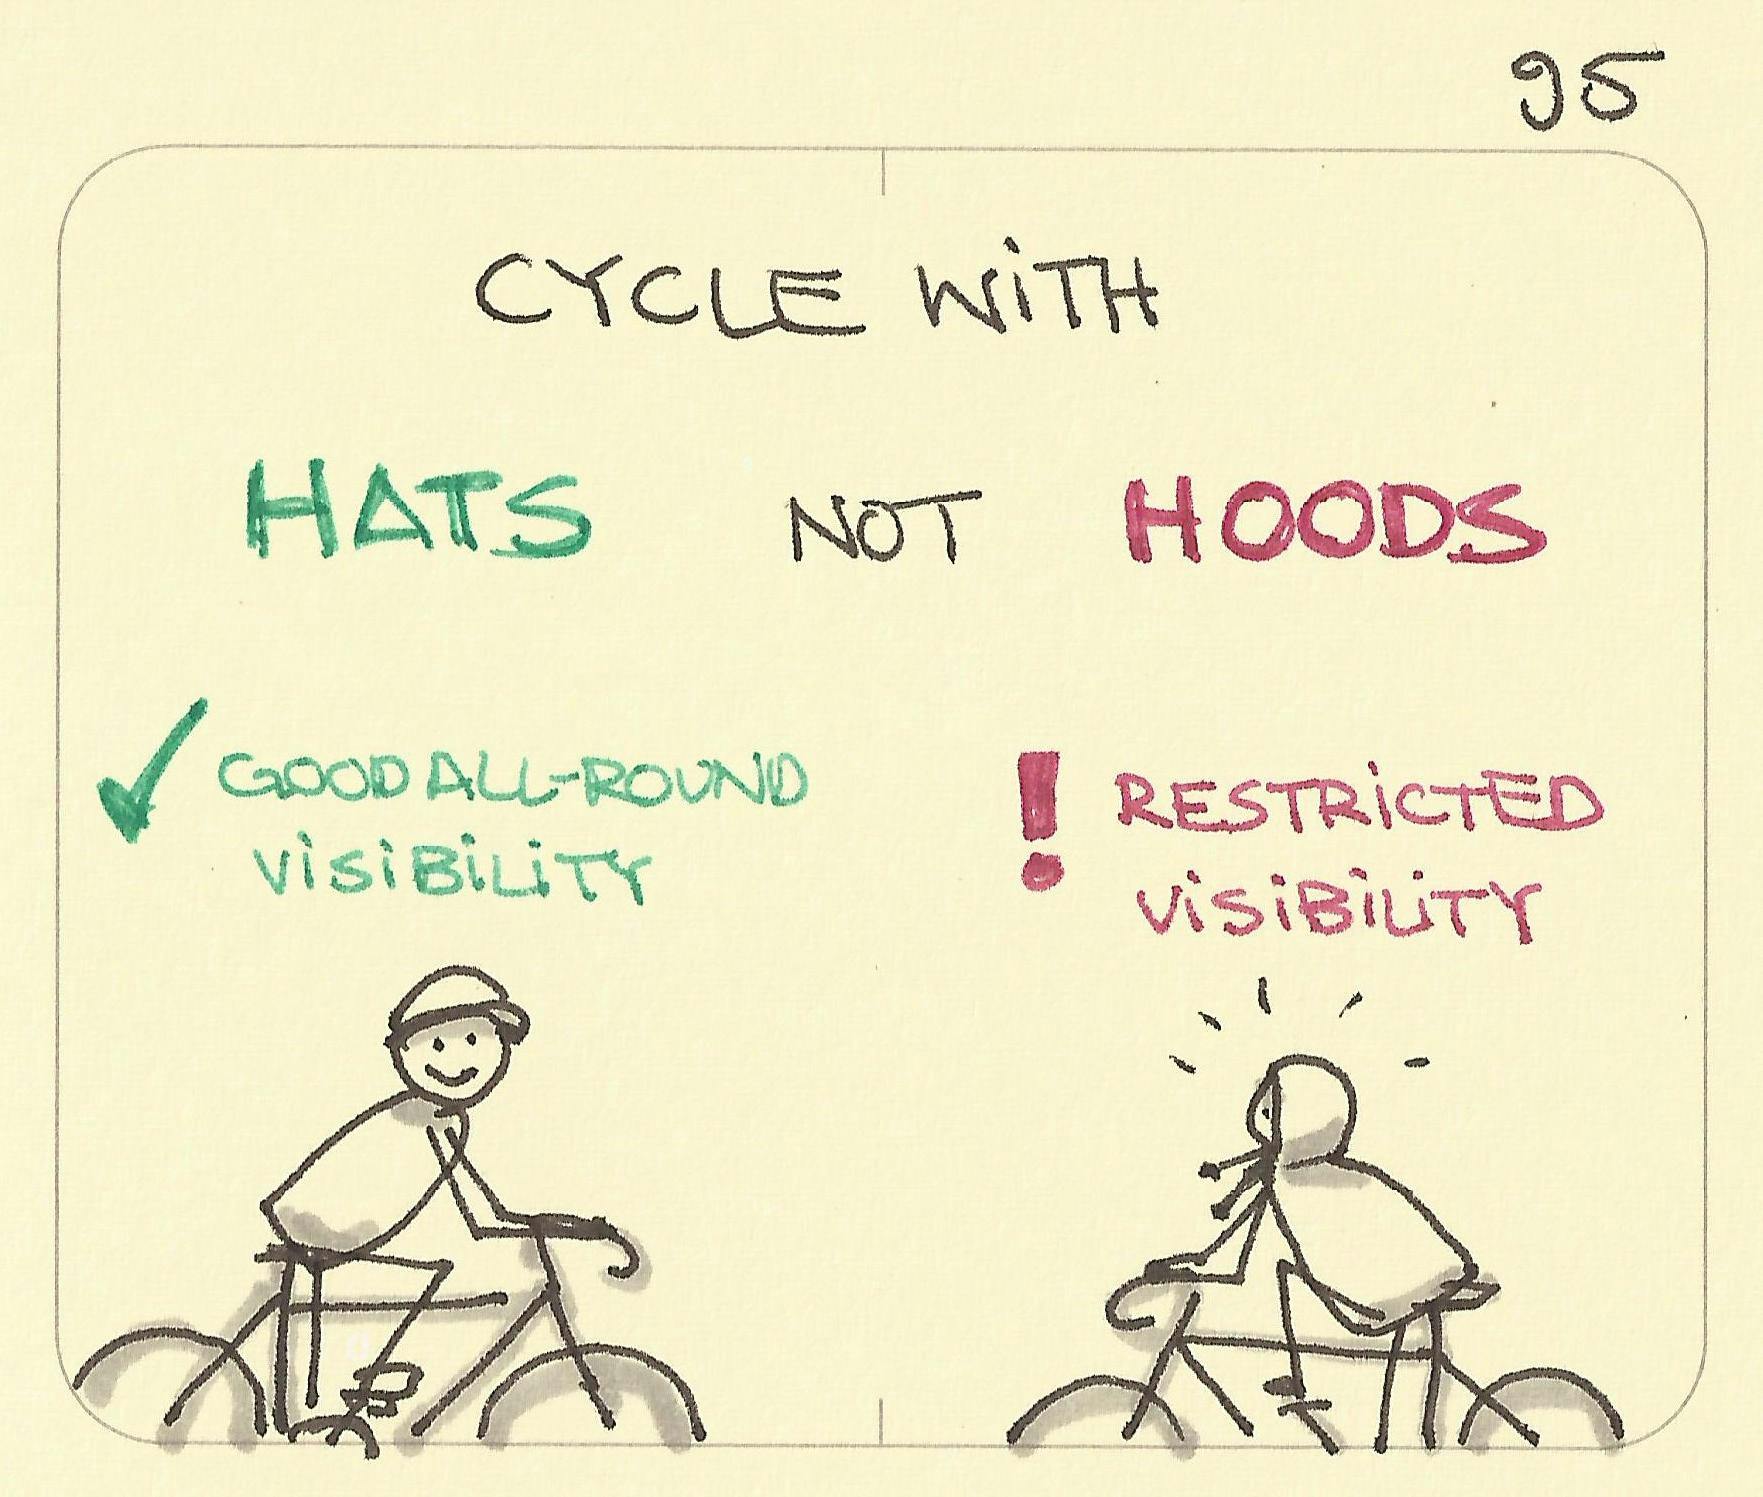 Cycle with hats not hoods - Sketchplanations